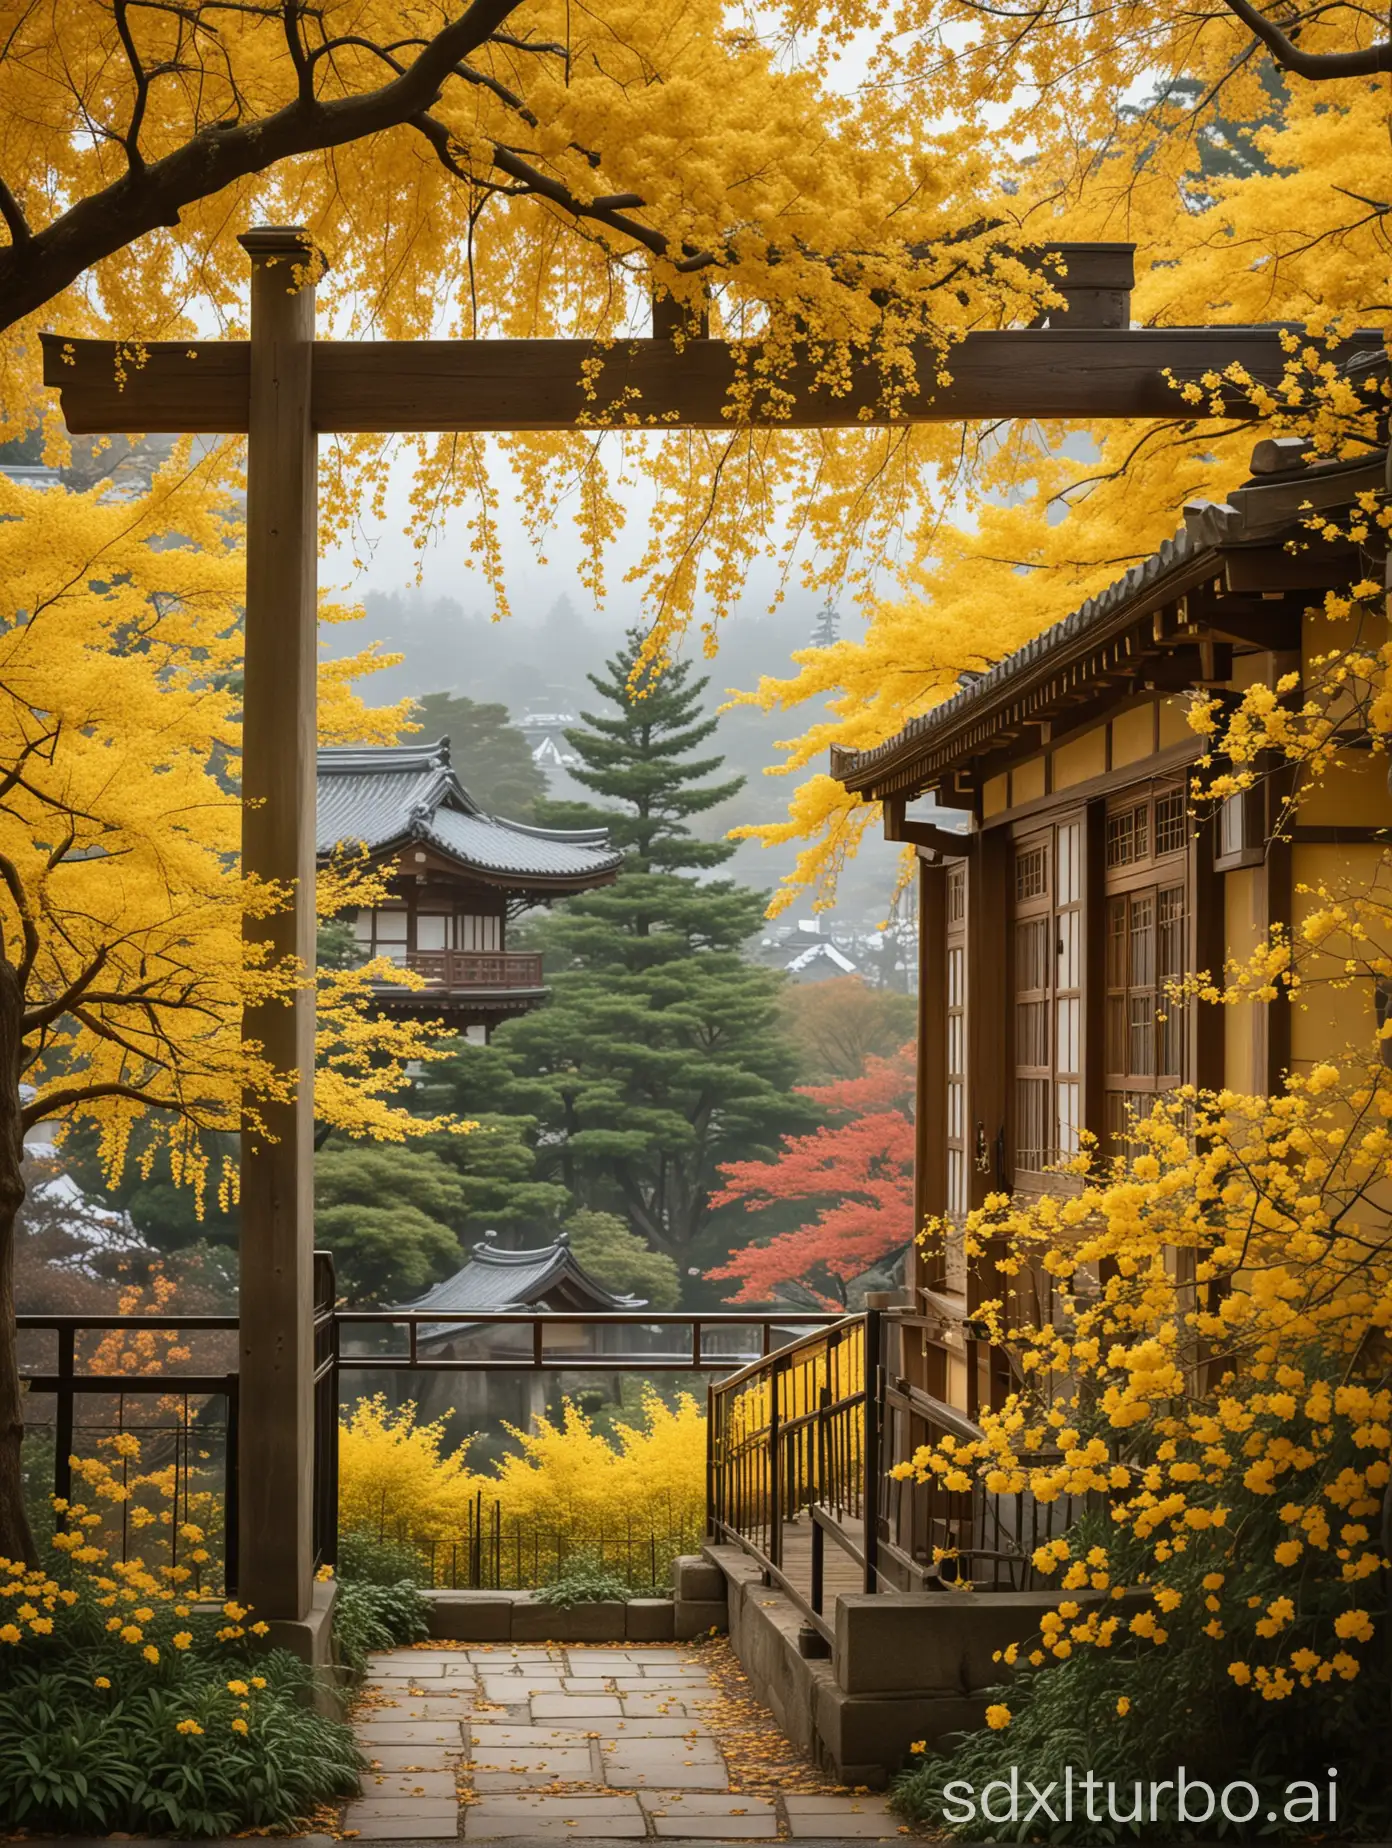 Radiant-Yellow-Blooms-Amidst-Serene-Japanese-Architecture